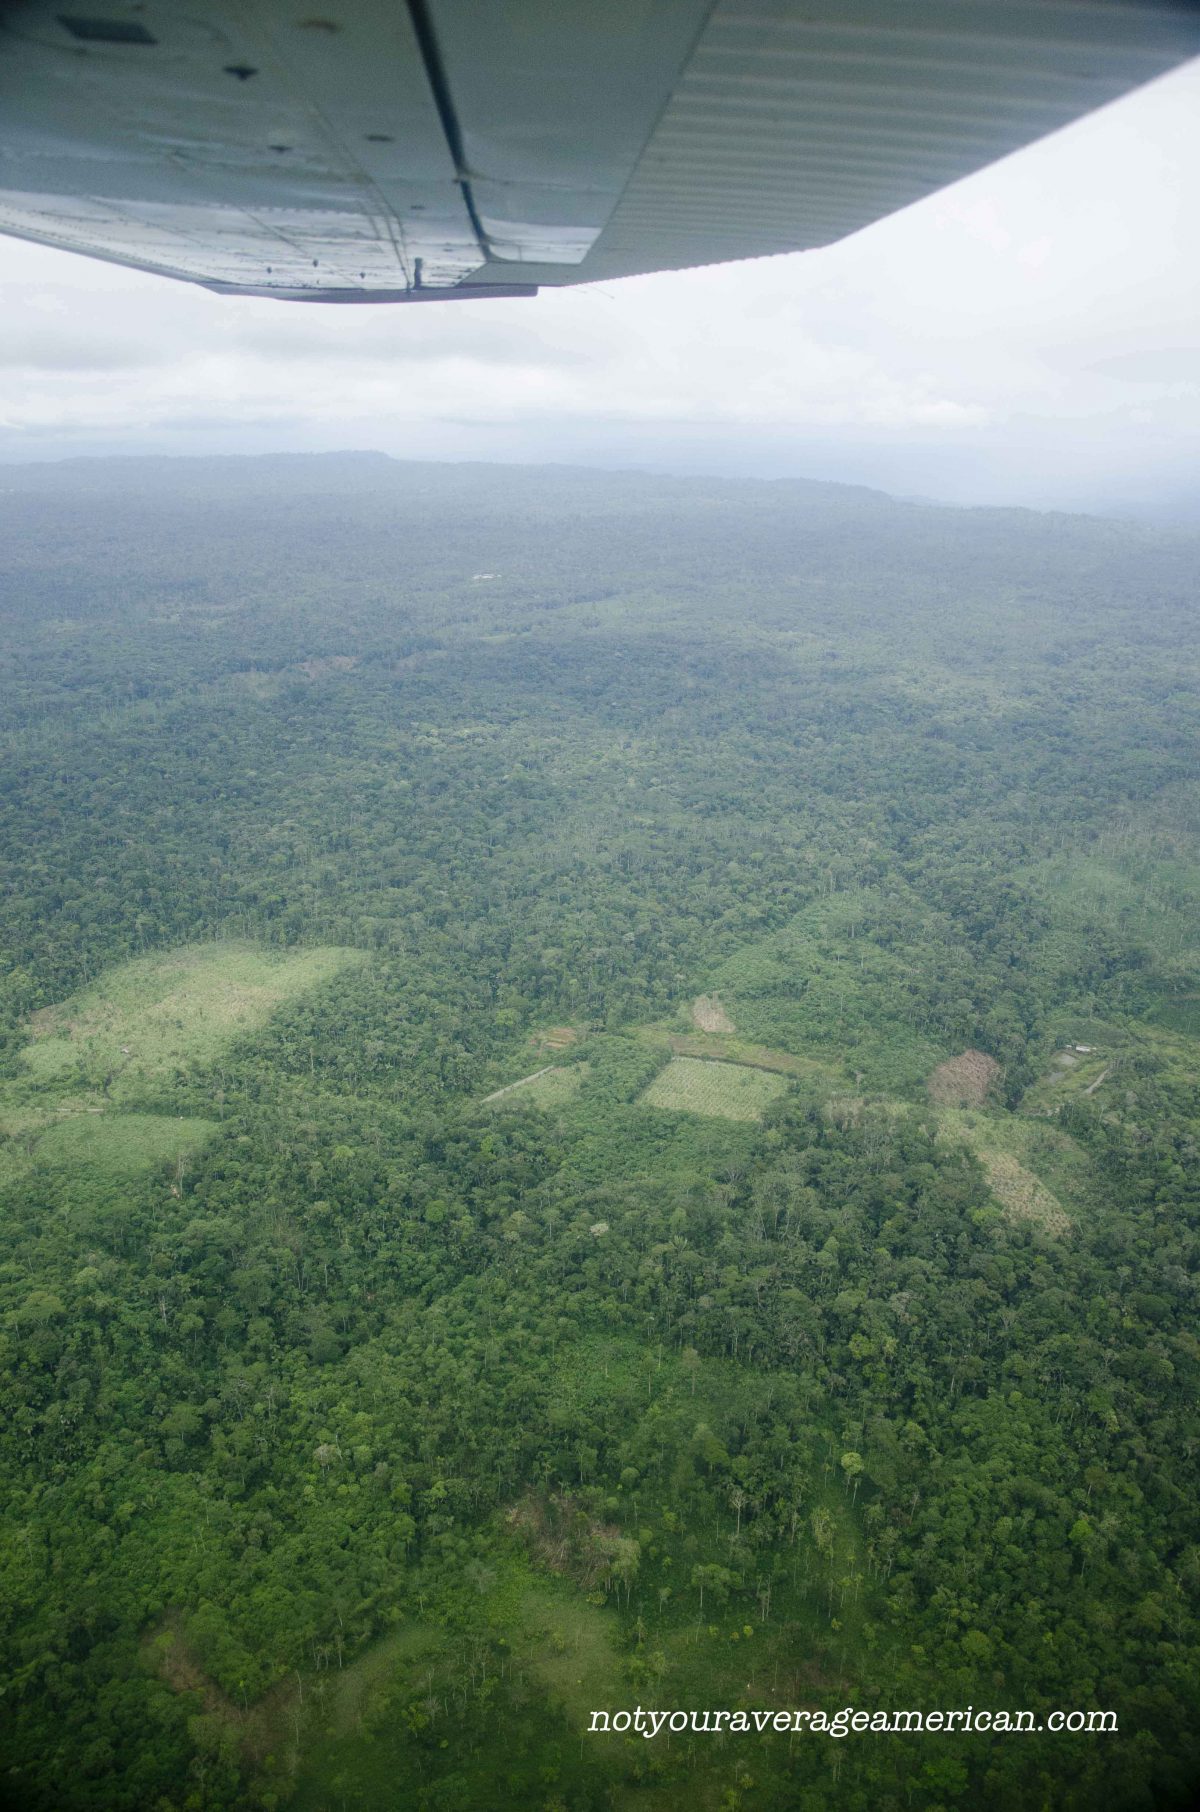 Leaving Shell for the jungle by plane allows us to see the changes taking place, Huaroani Lodge